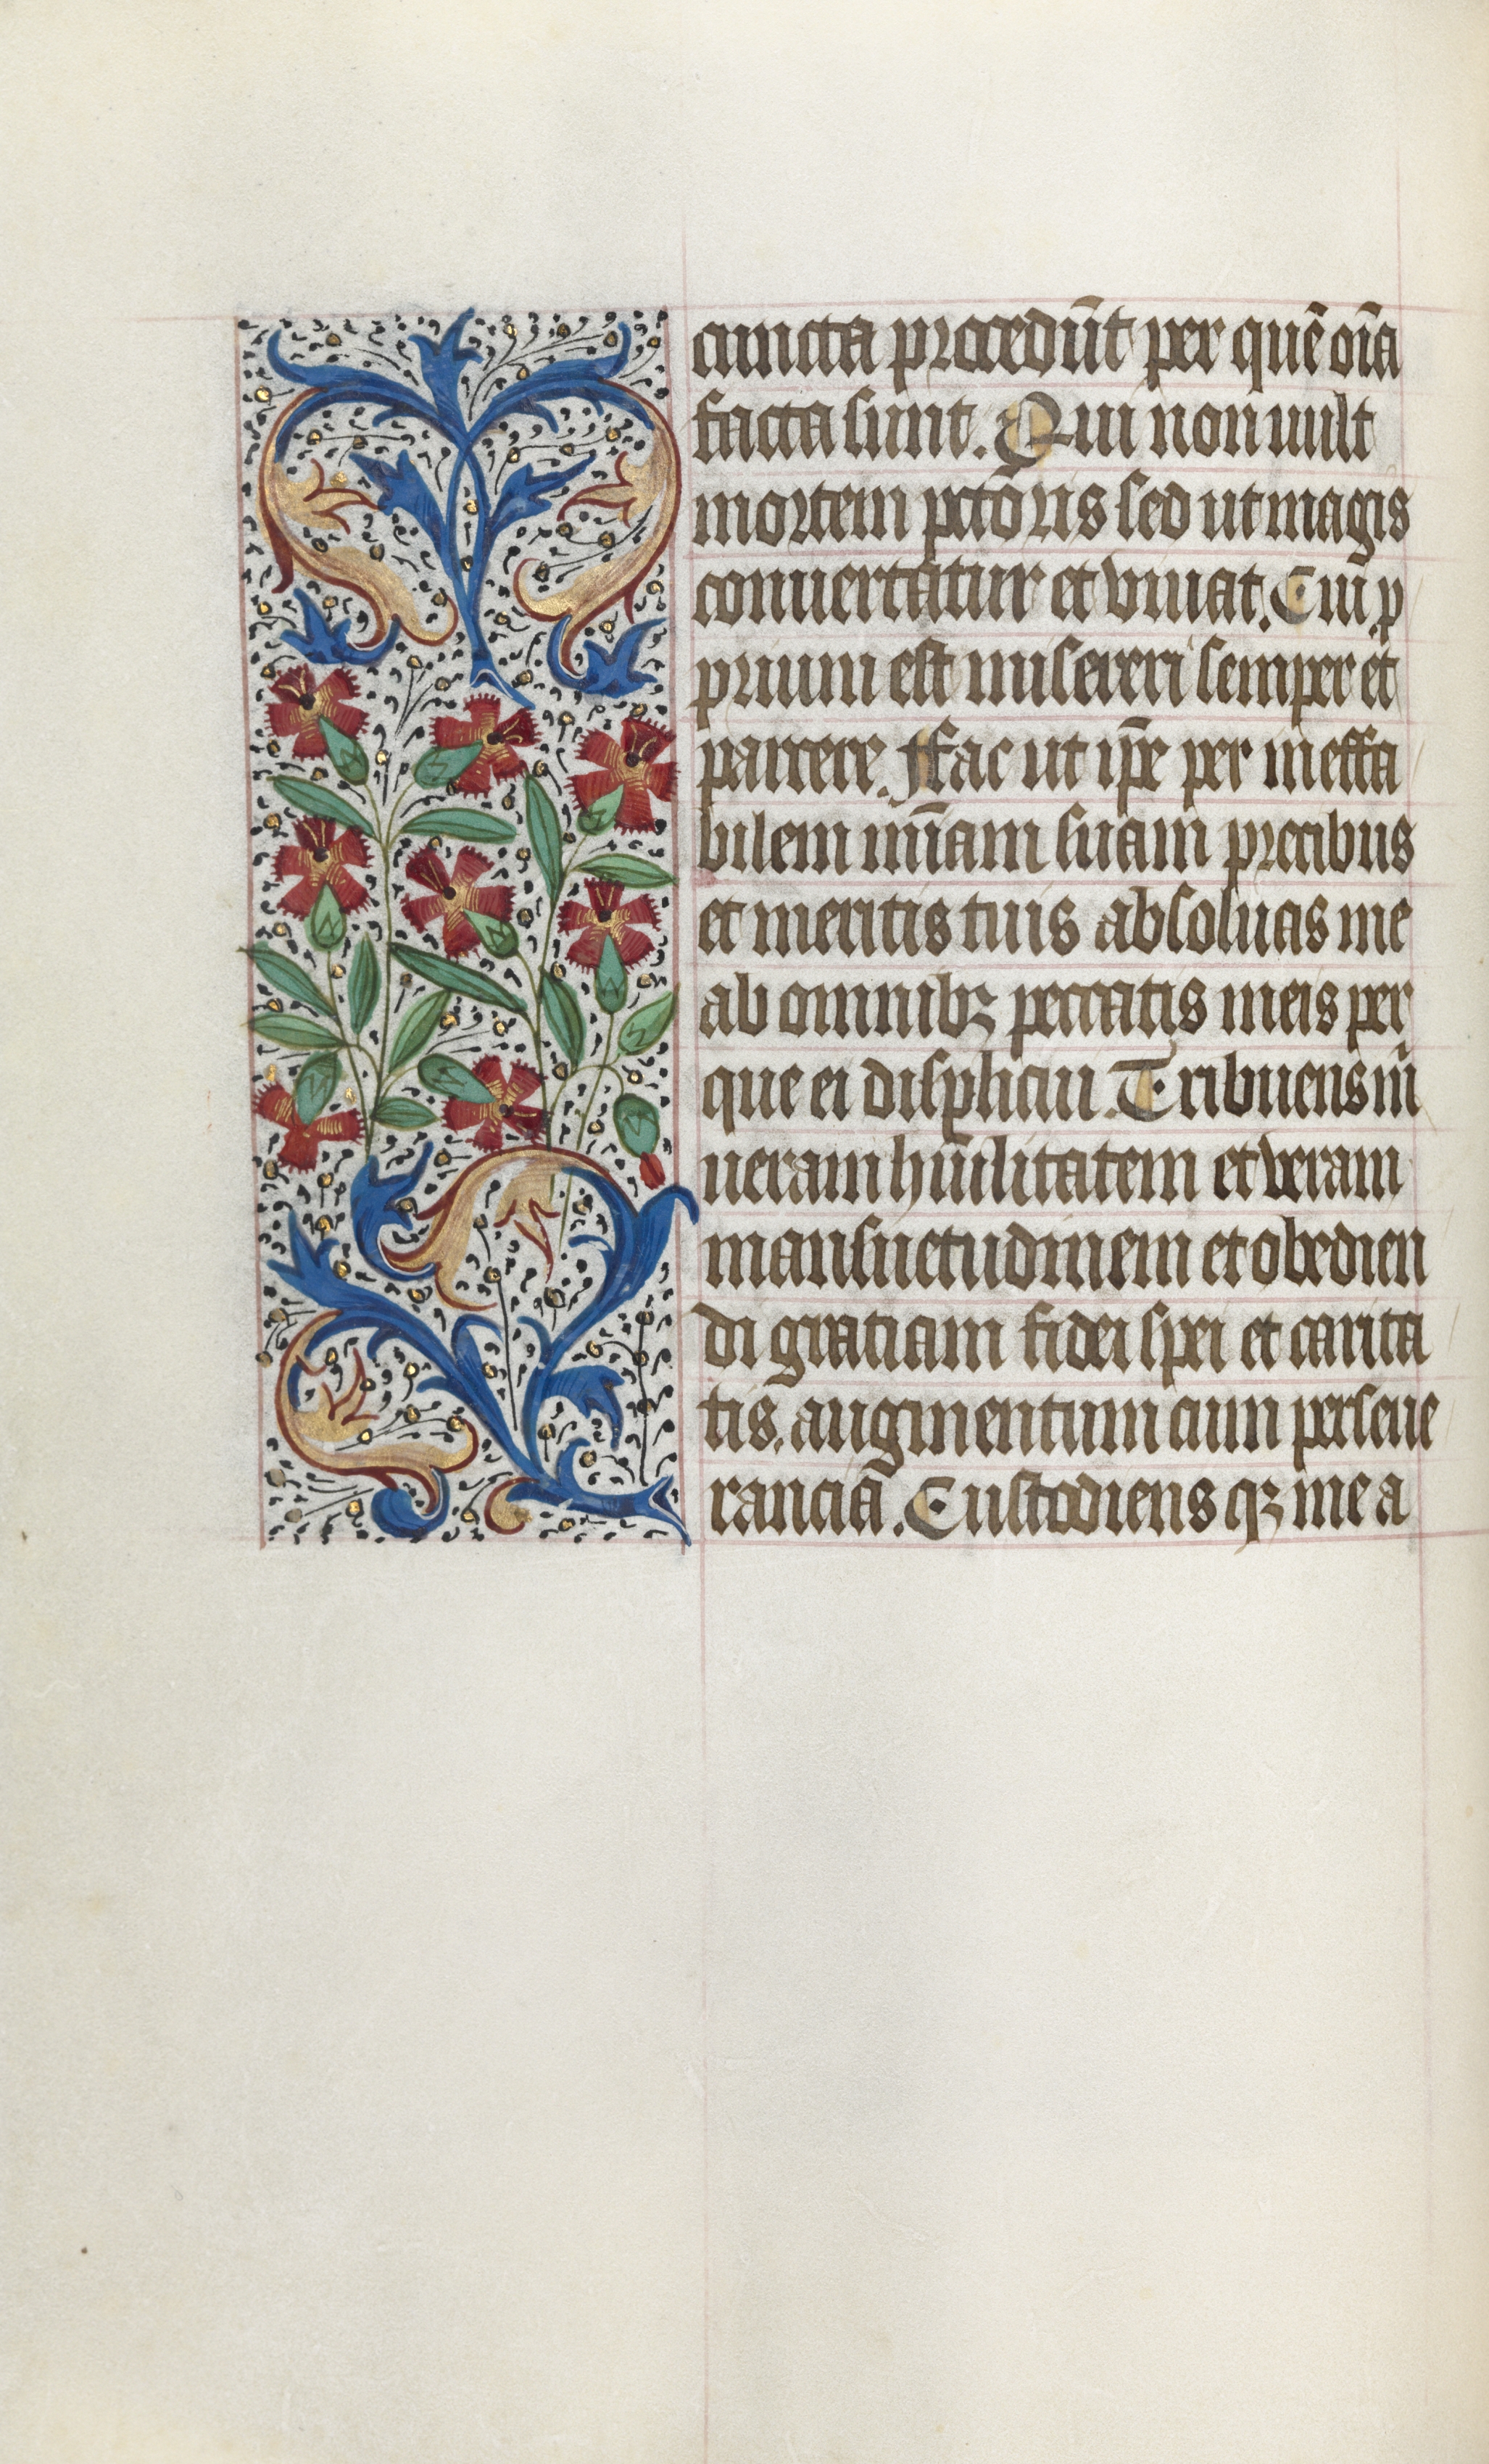 Book of Hours (Use of Rouen): fol. 24v